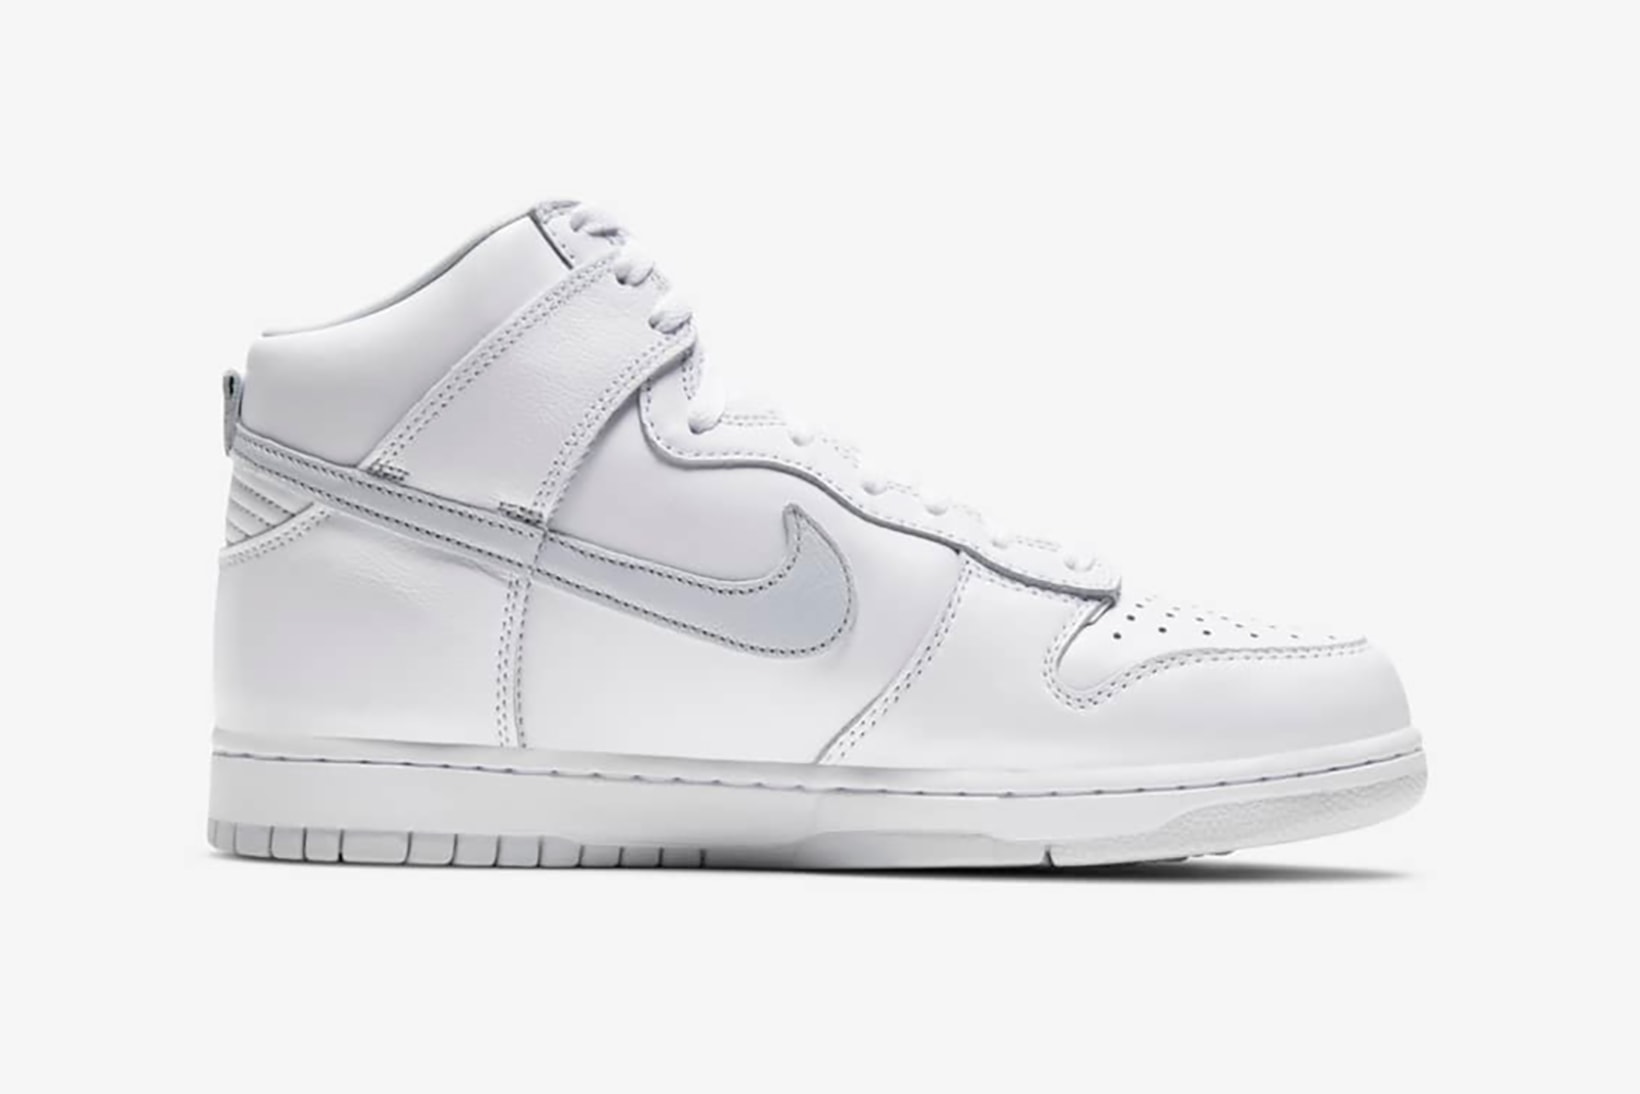 nike dunk high sneakers white silver gray pure platinum colorway sneakerhead footwear shoes